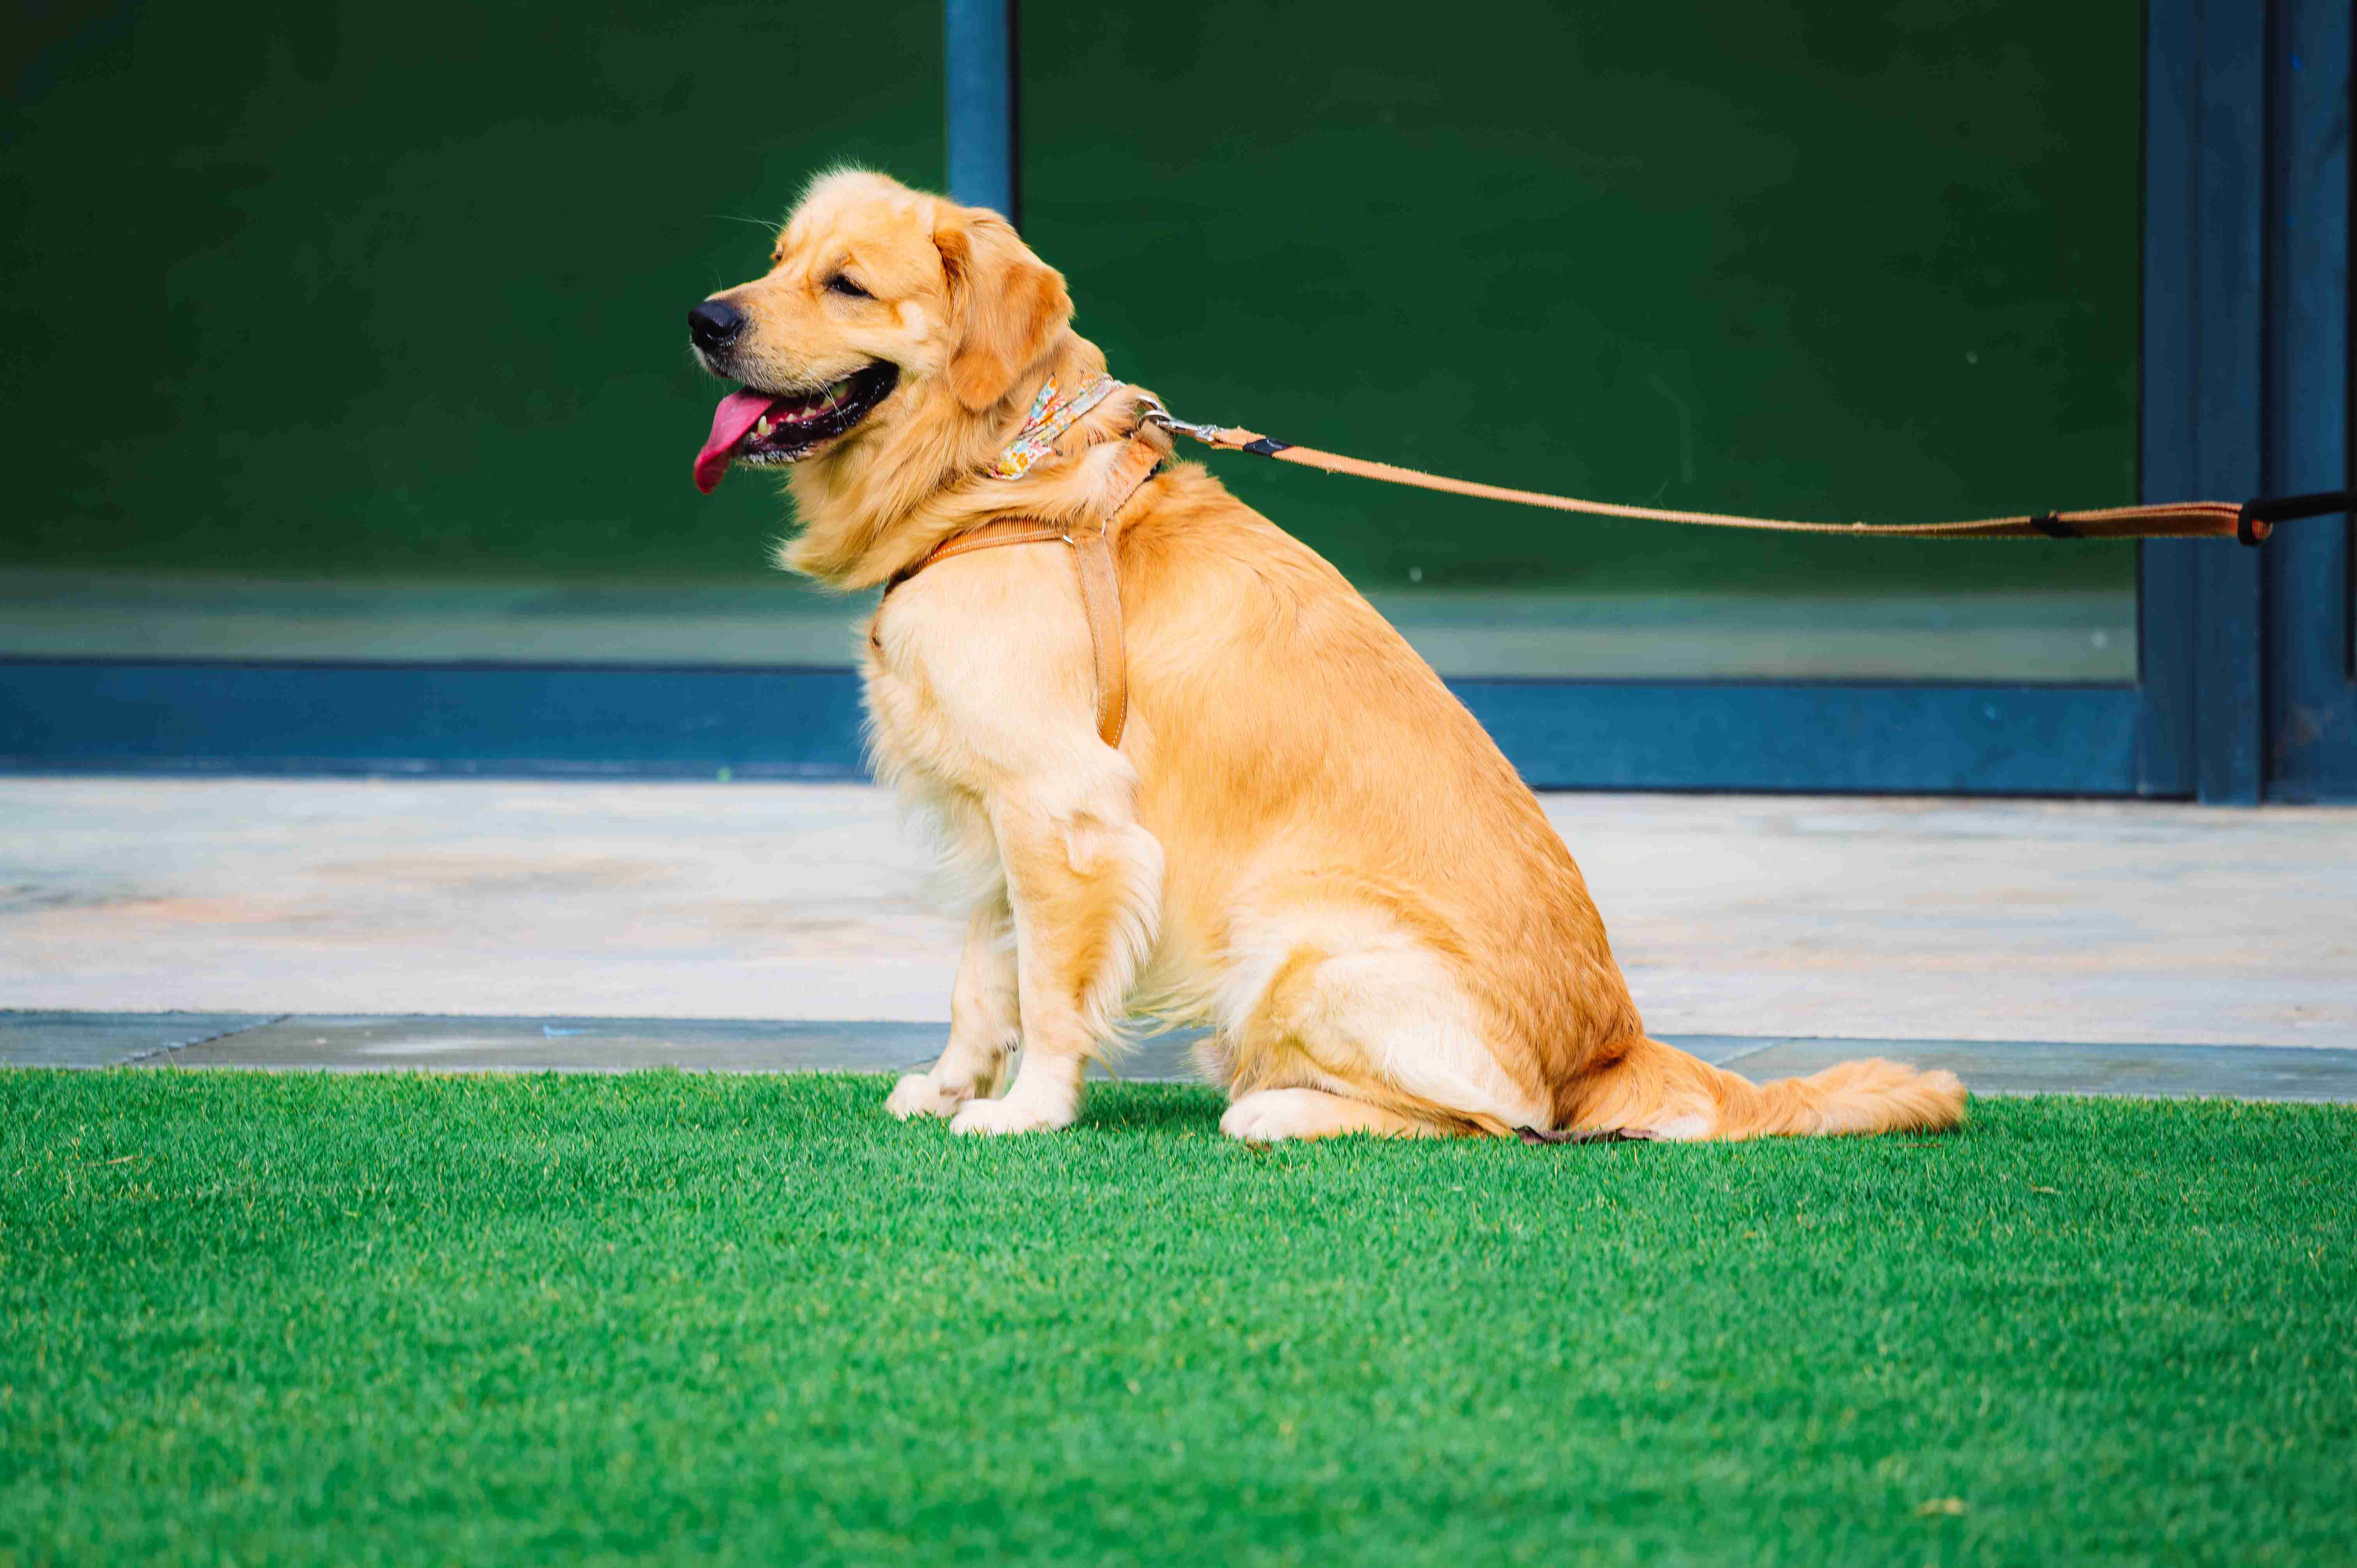 How important is socialization for Golden Retrievers?